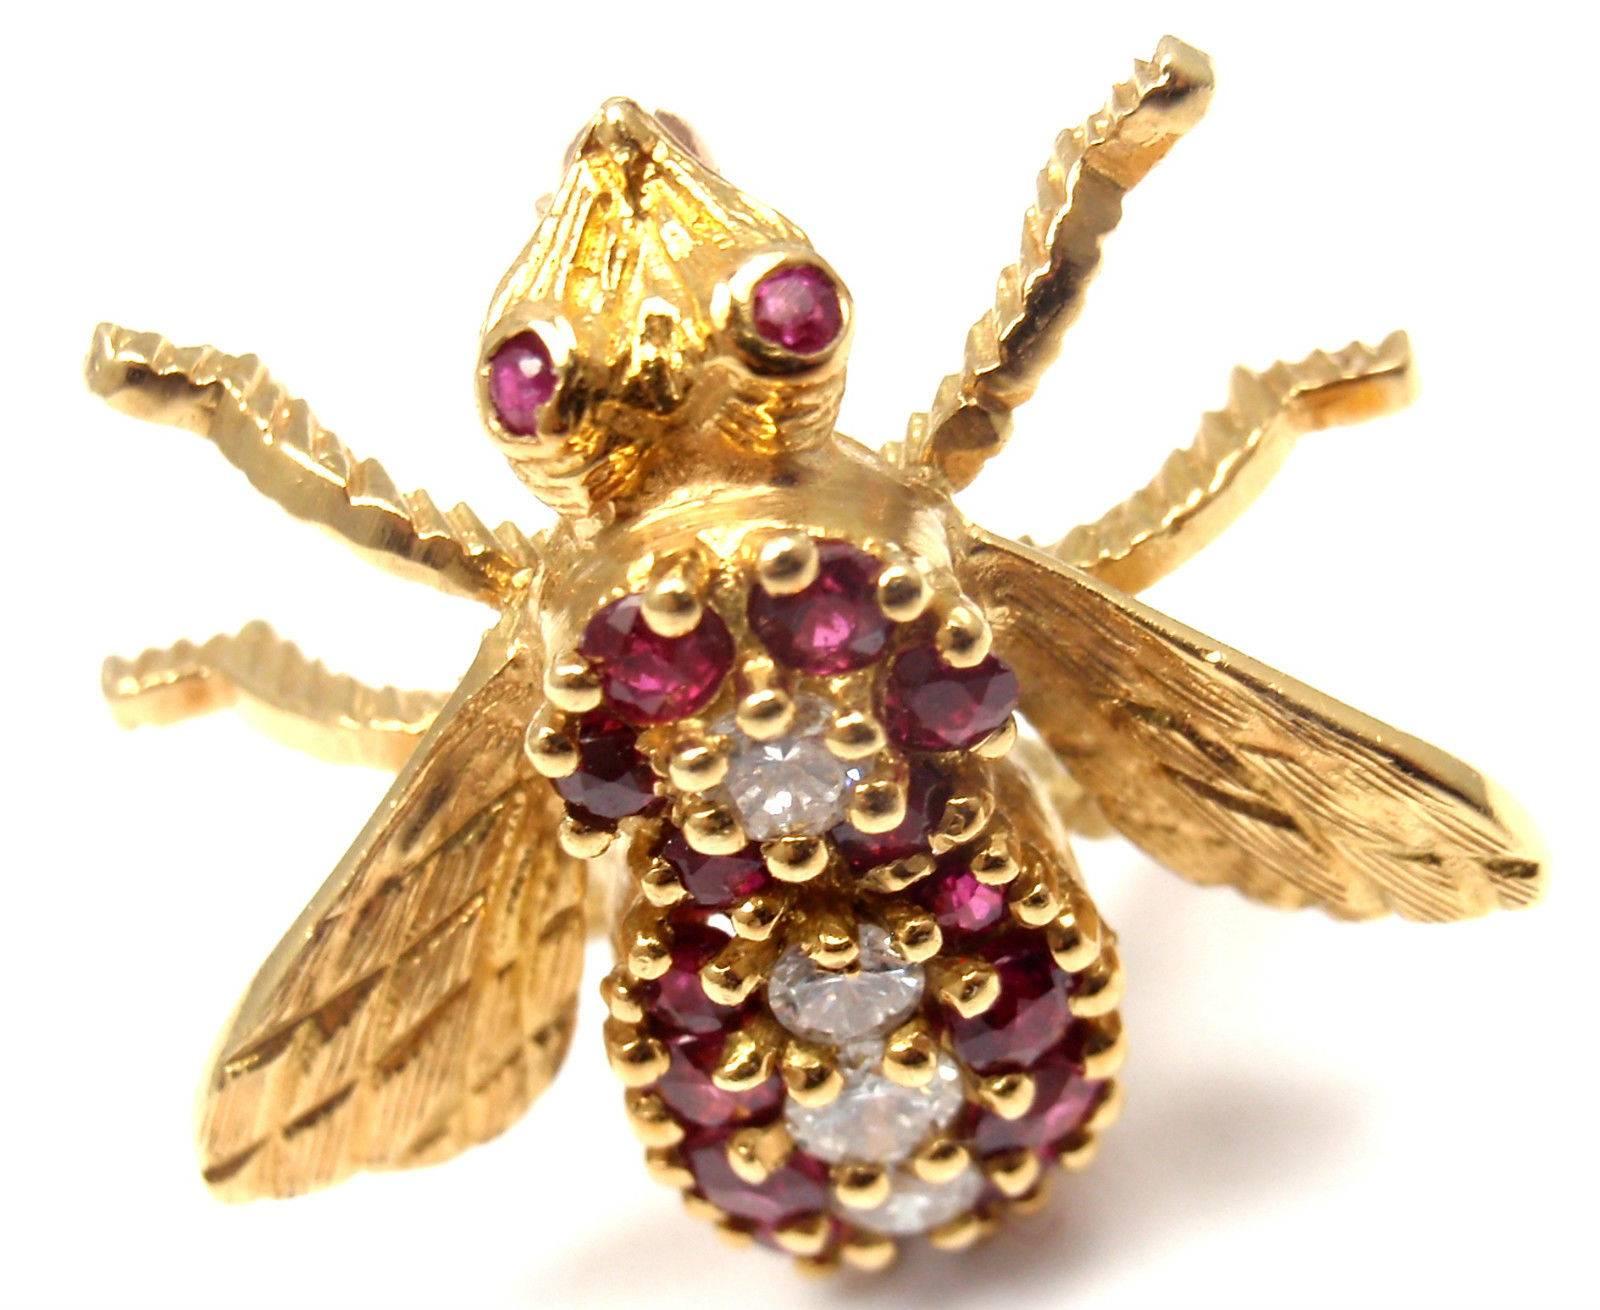 18k Yellow Gold Diamond Ruby Bee Pin Brooch by Herbert Rosenthal.
With 5 round brilliant cut diamonds VS1 Clarity, G Color 
total weight approx. .35ct
12 round rubies

Details:
Measurements Brooch: 23mm x 22mm
Ring Size: 7
Weight: 13.8